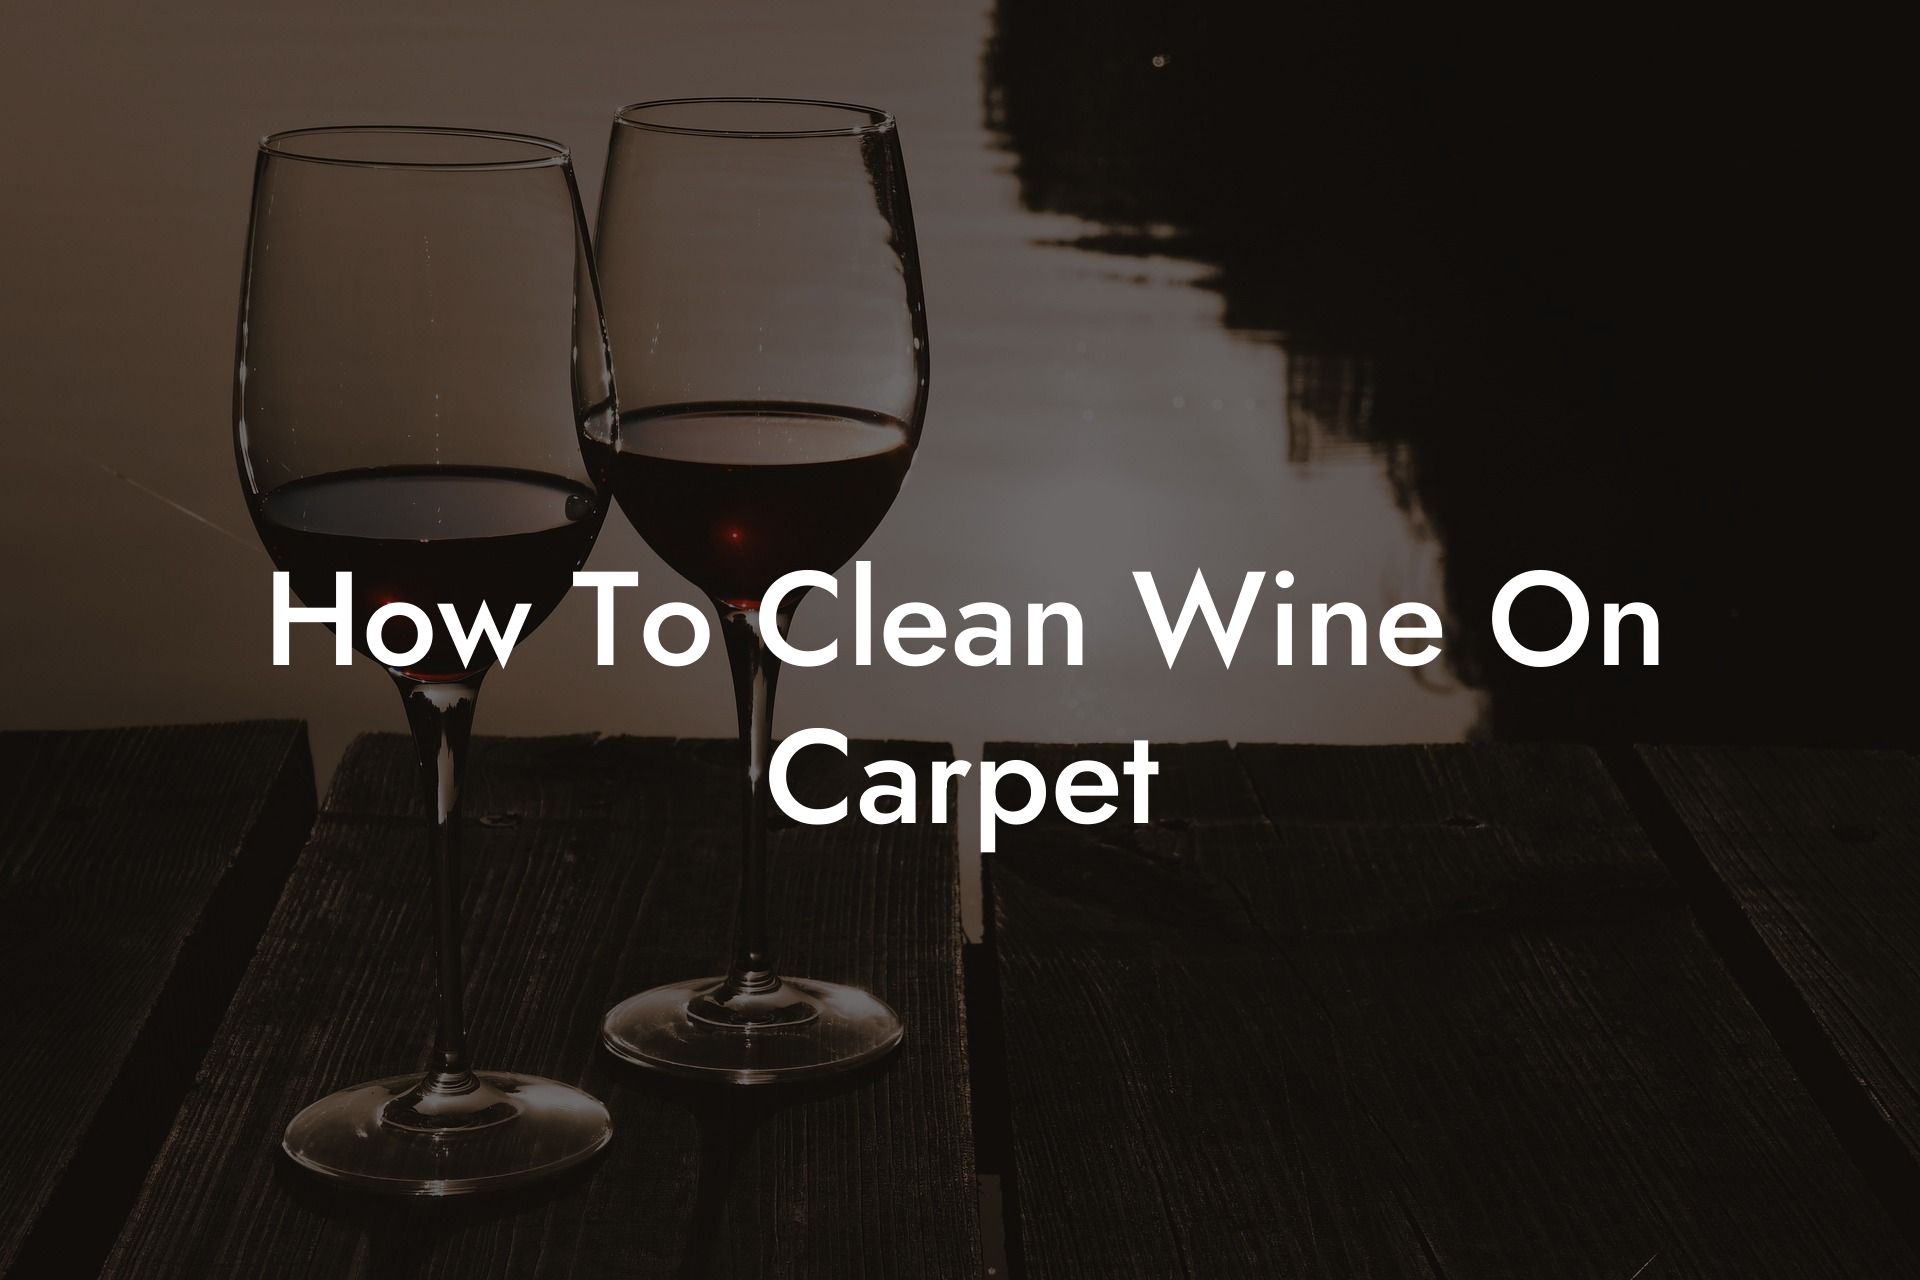 How To Clean Wine On Carpet